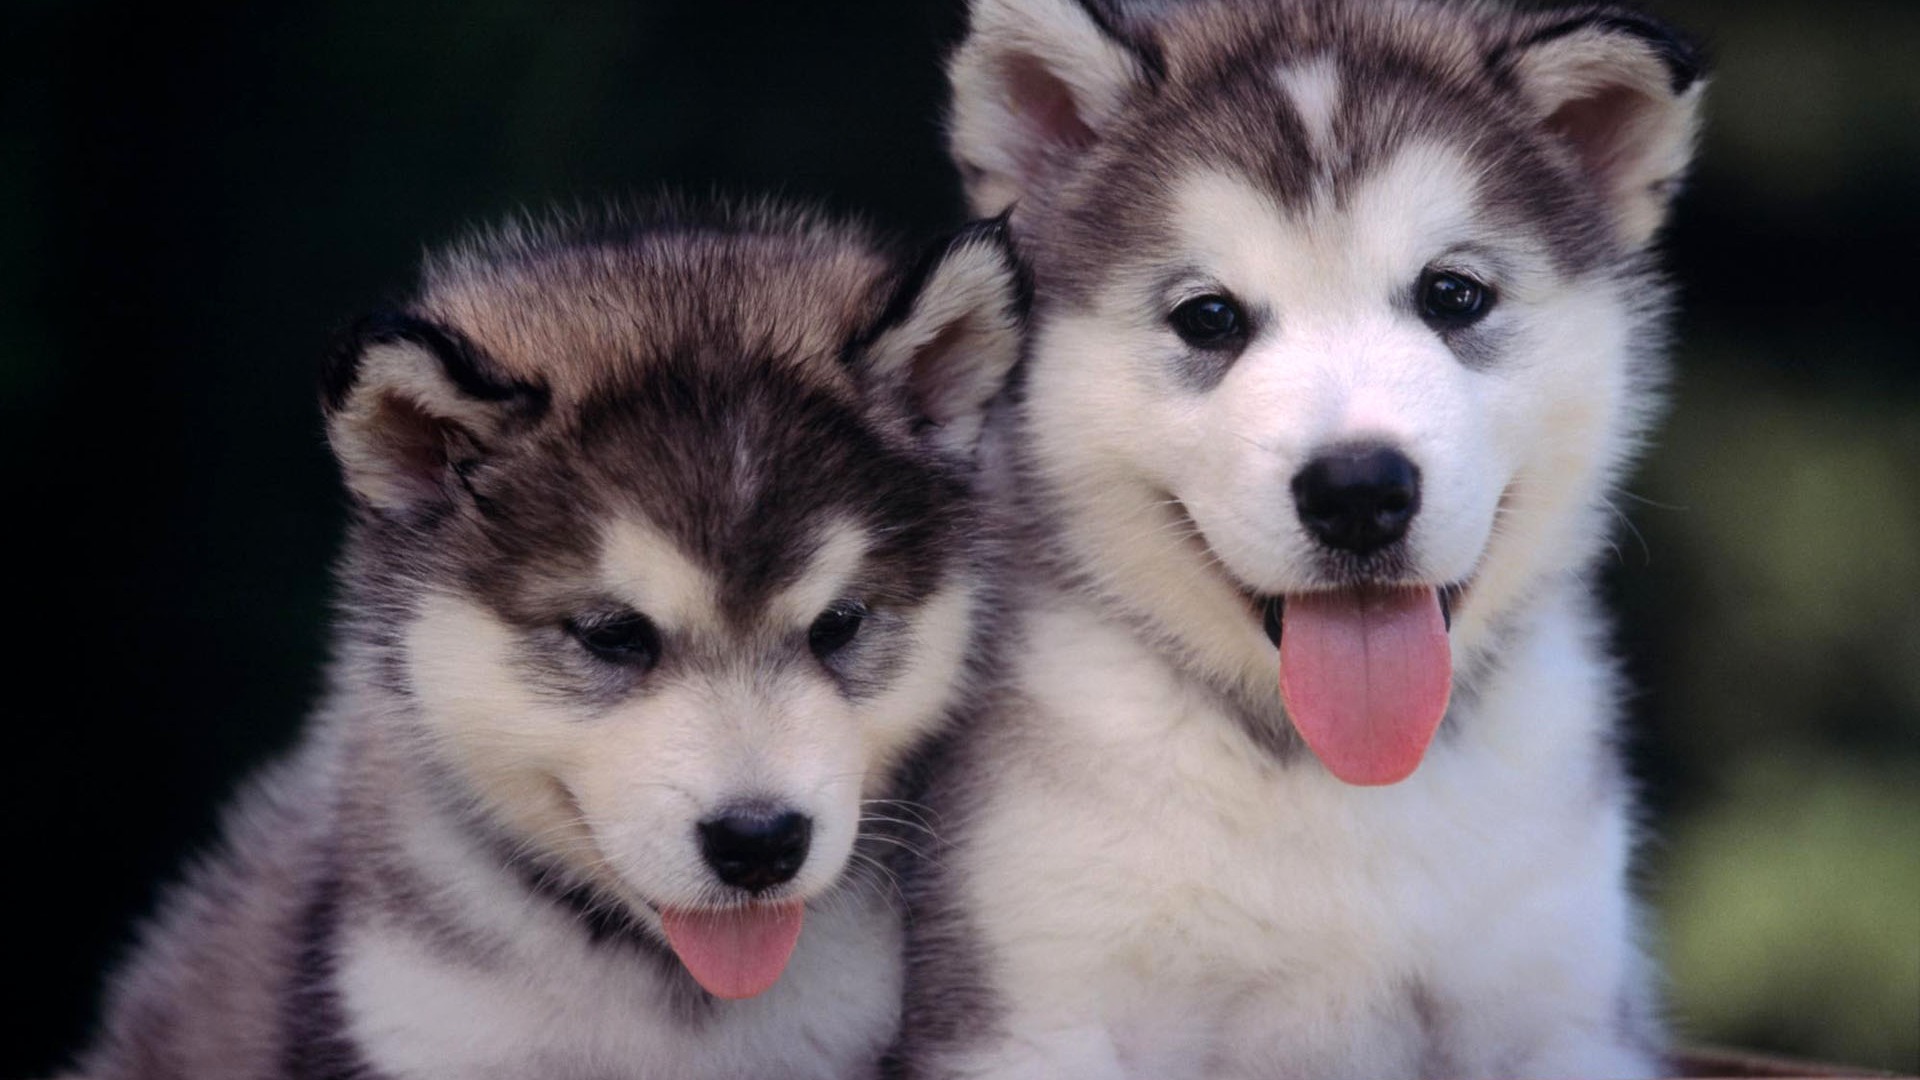 Puppy Photo HD wallpapers (2) #20 - 1920x1080